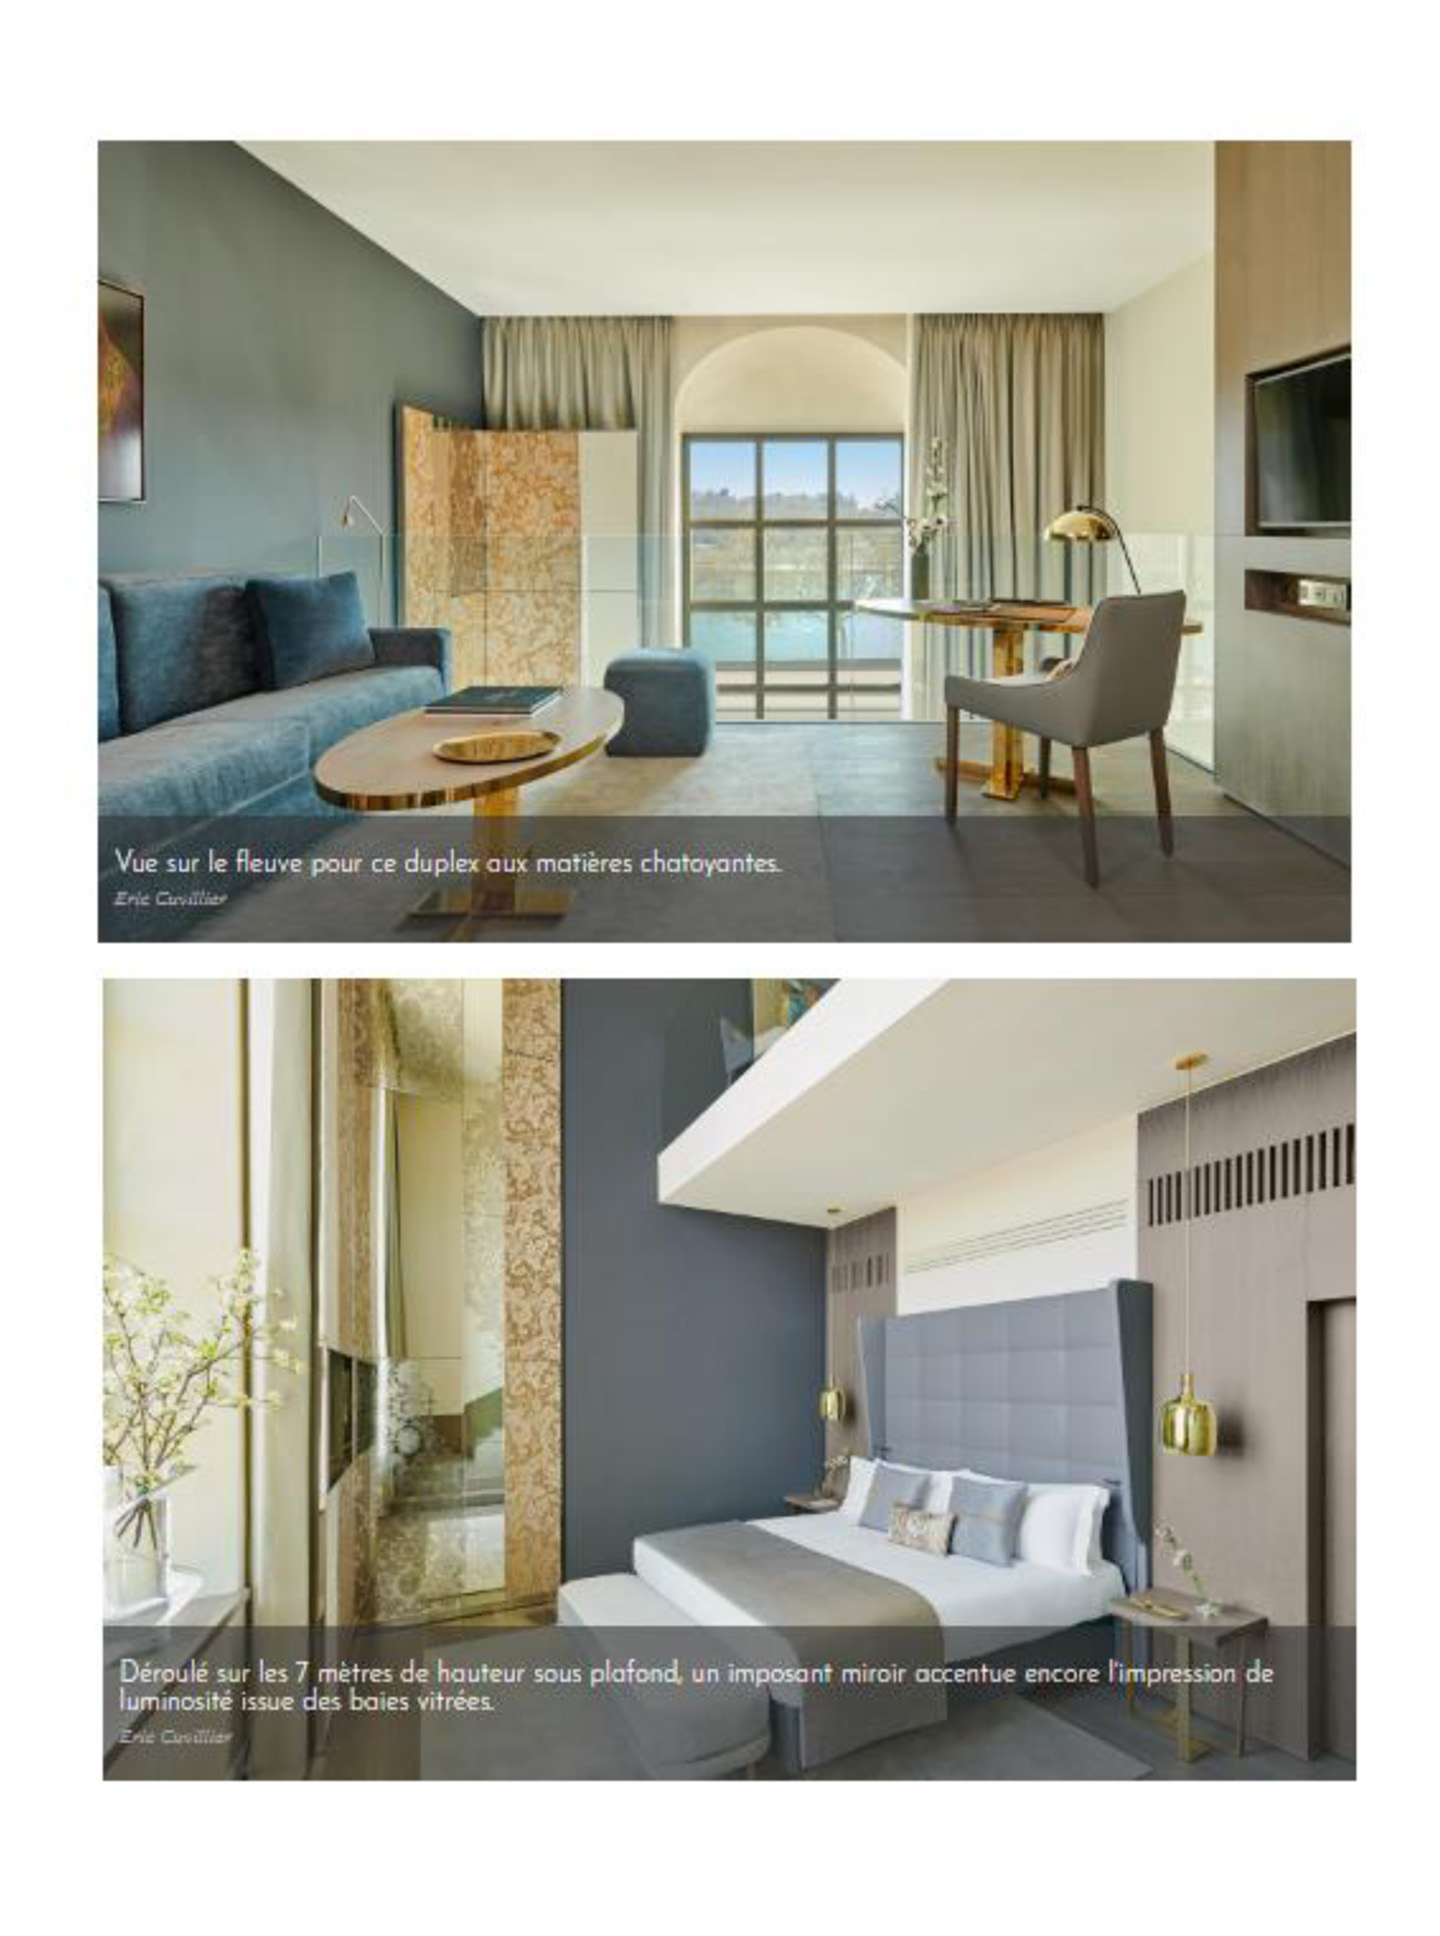 Article on the InterContinental Lyon hôtel dieu realized by the studio jean-Philippe Nuel in the magazine ideat, new luxury hotel, luxury interior design, rehabilitated historical center